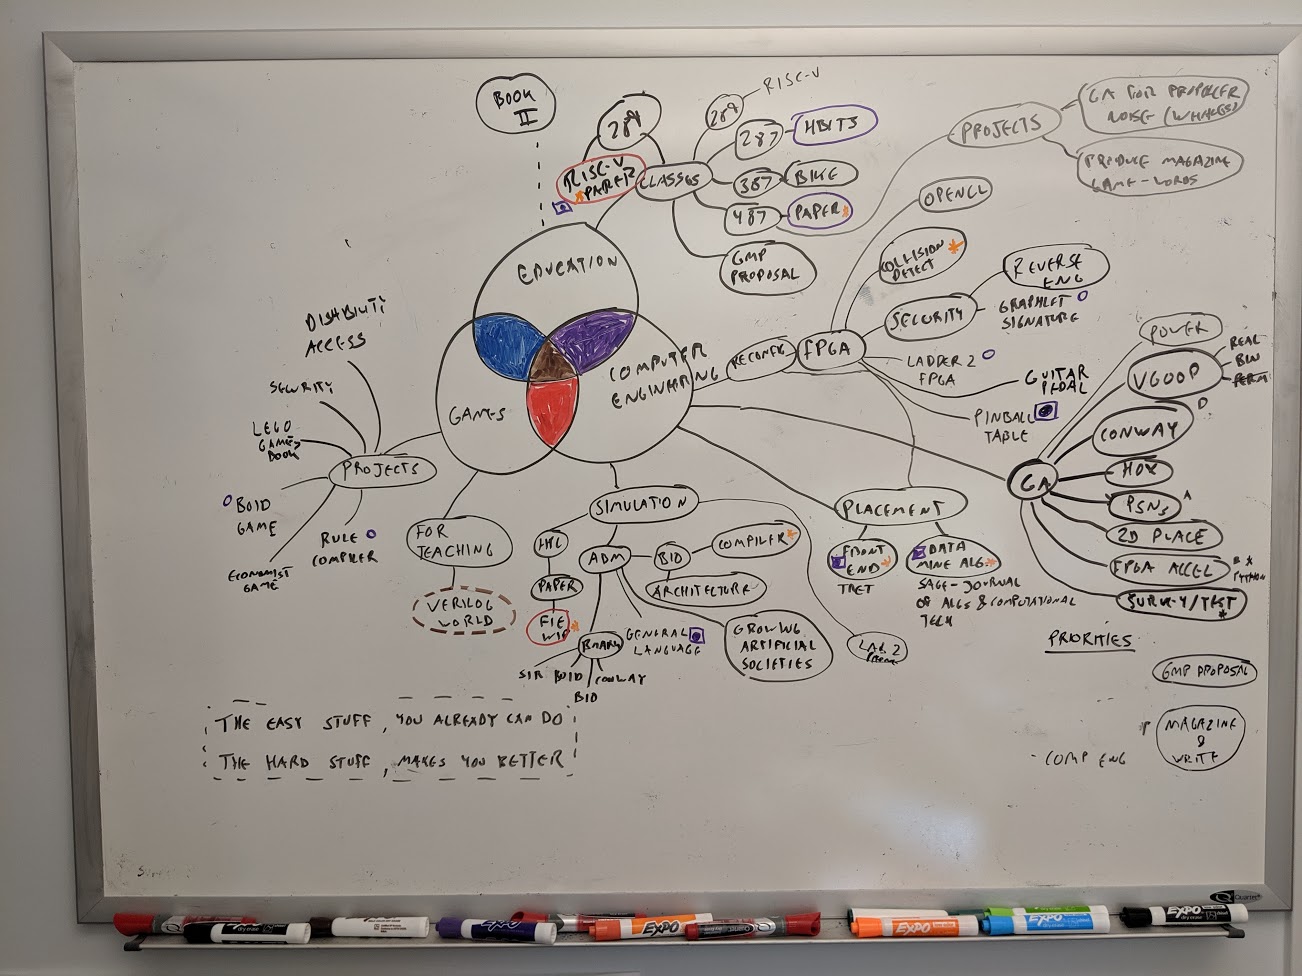 August 2019 research plan - mind map